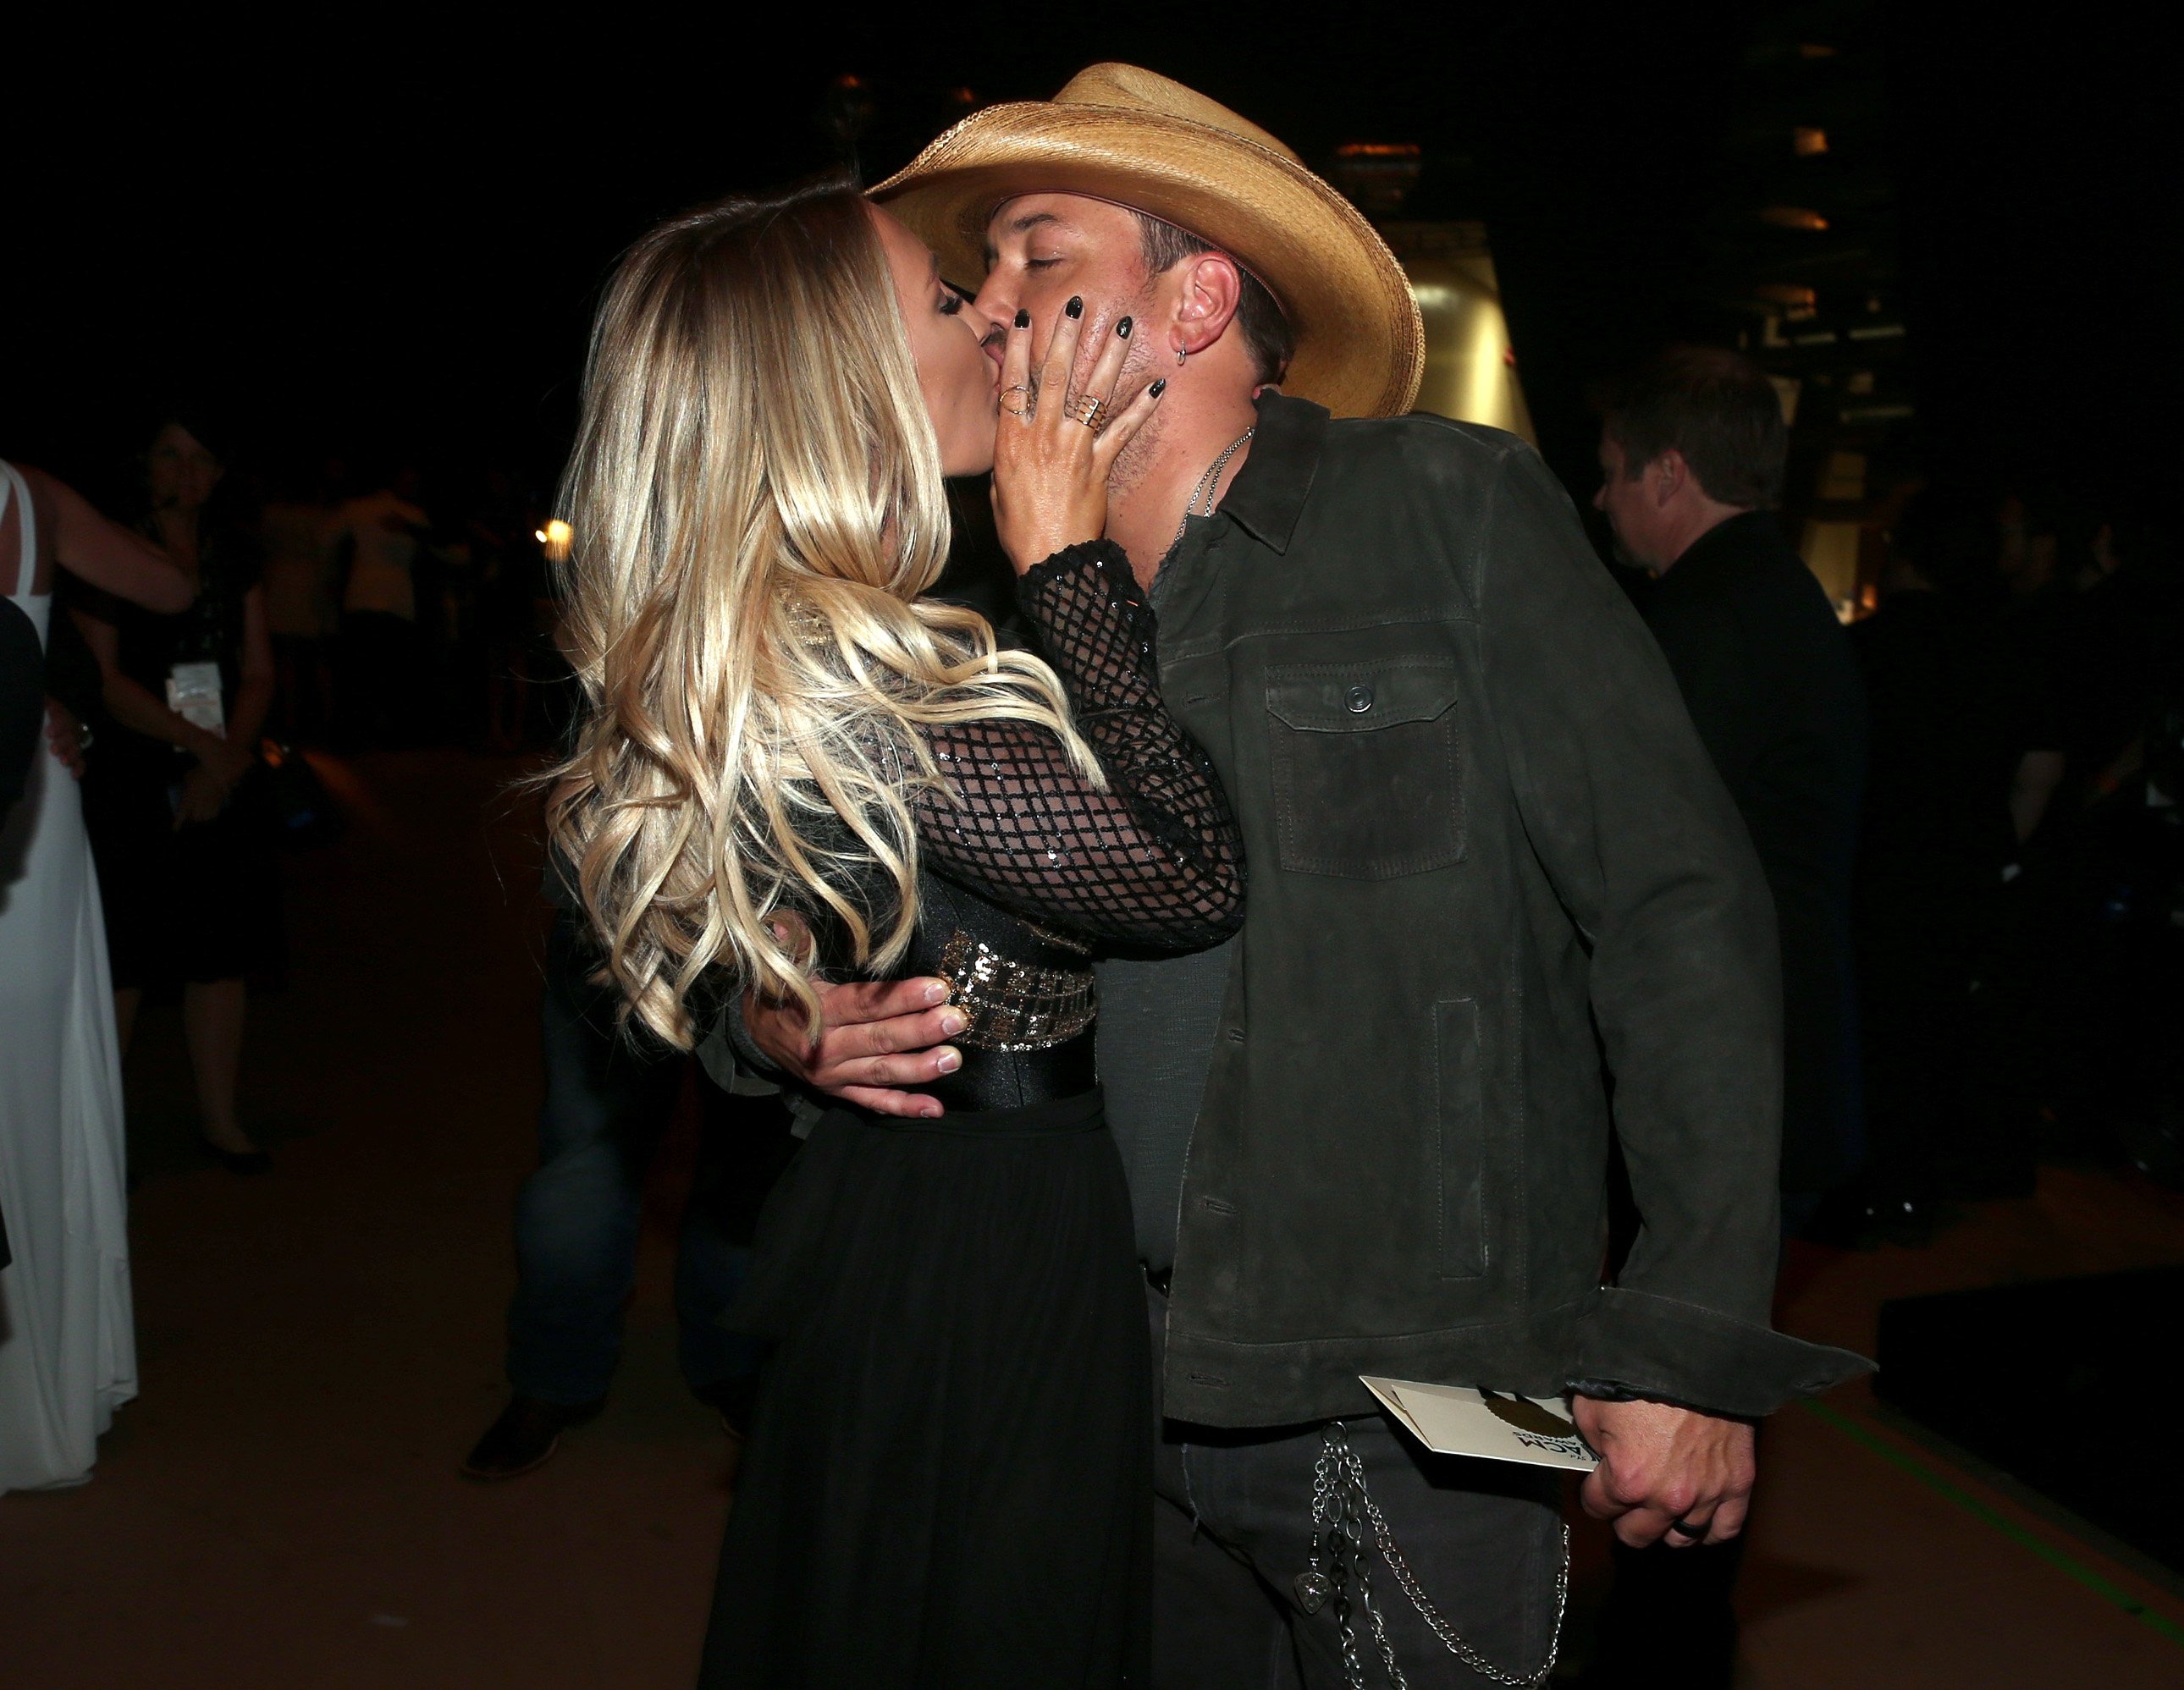 Brittany Kerr and Jason Aldean, winner of the Entertainer of the Year award, kiss at the 51st Academy of Country Music Awards at MGM Grand Garden Arena on April 3, 2016 in Las Vegas, Nevada | Source: Getty Images